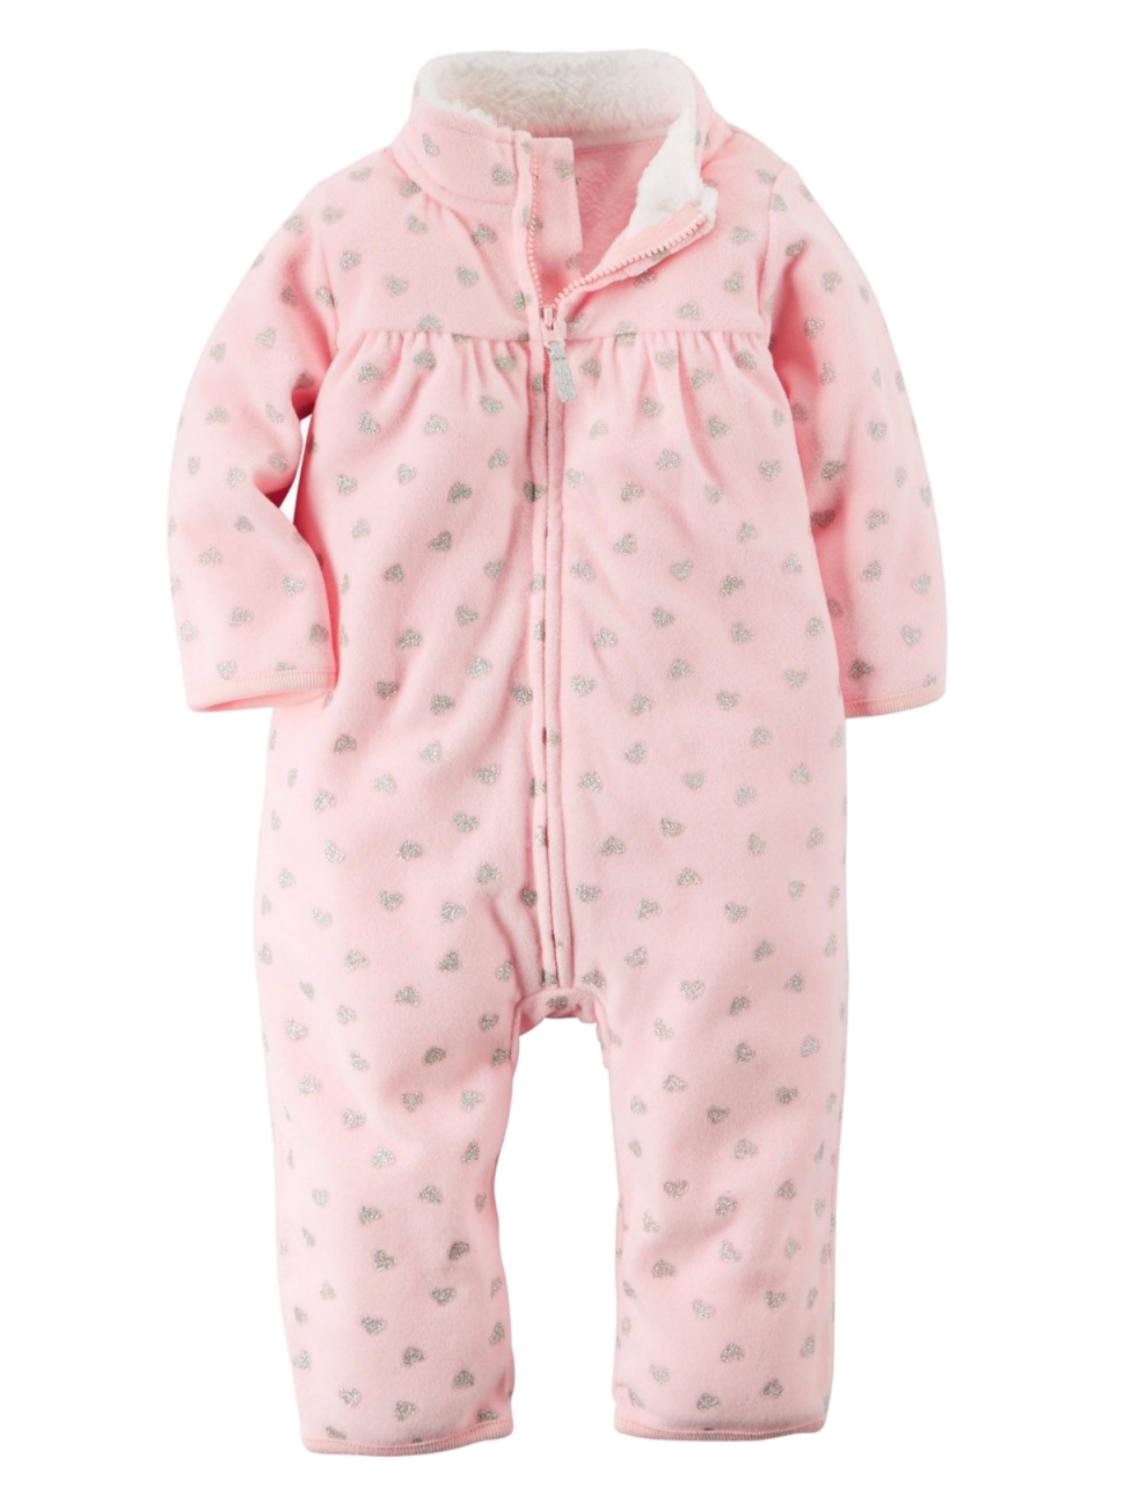 Carter's Carters Infant Girls Pink & Silver Heart Print Jumpsuit Coverall Outfit